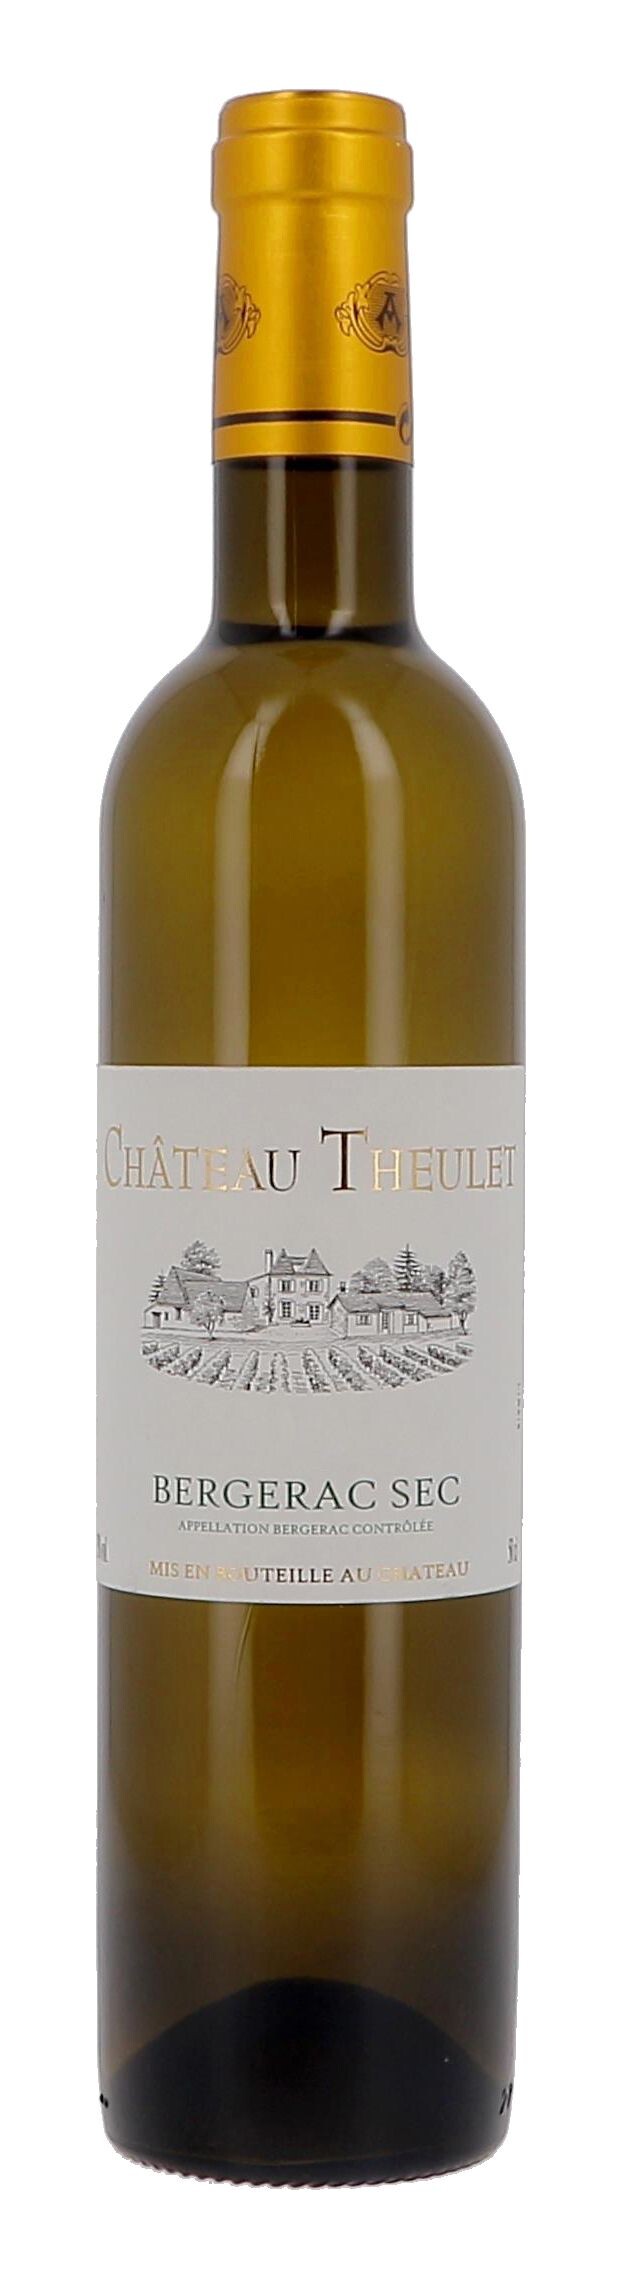 Bergerac white Chateau Theulet 50cl 2012 (Wijnen)